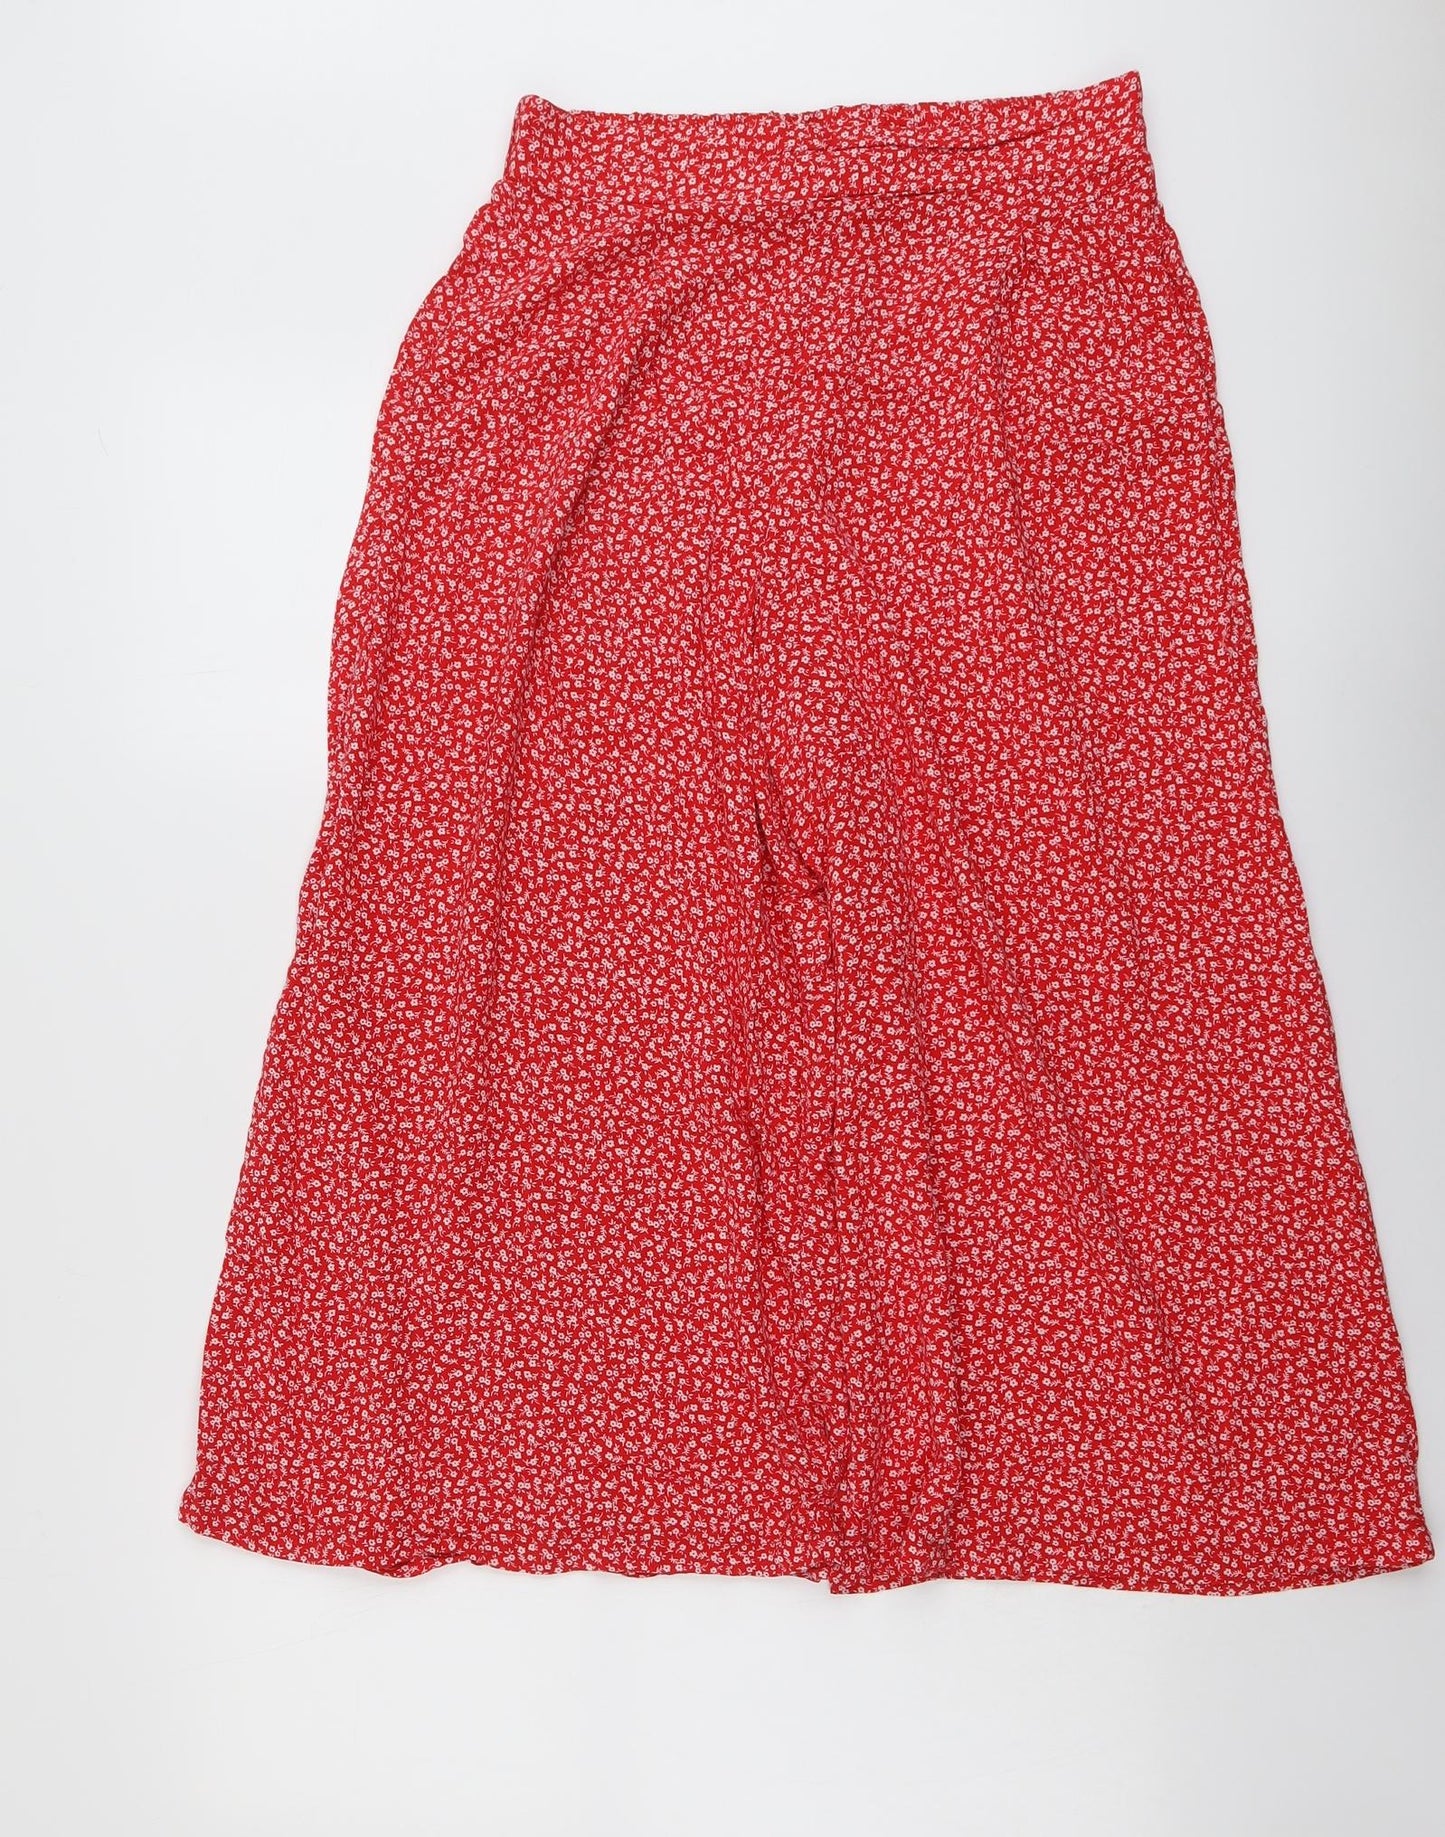 New Look Womens Red Floral Viscose A-Line Skirt Size 12 L20 in Regular